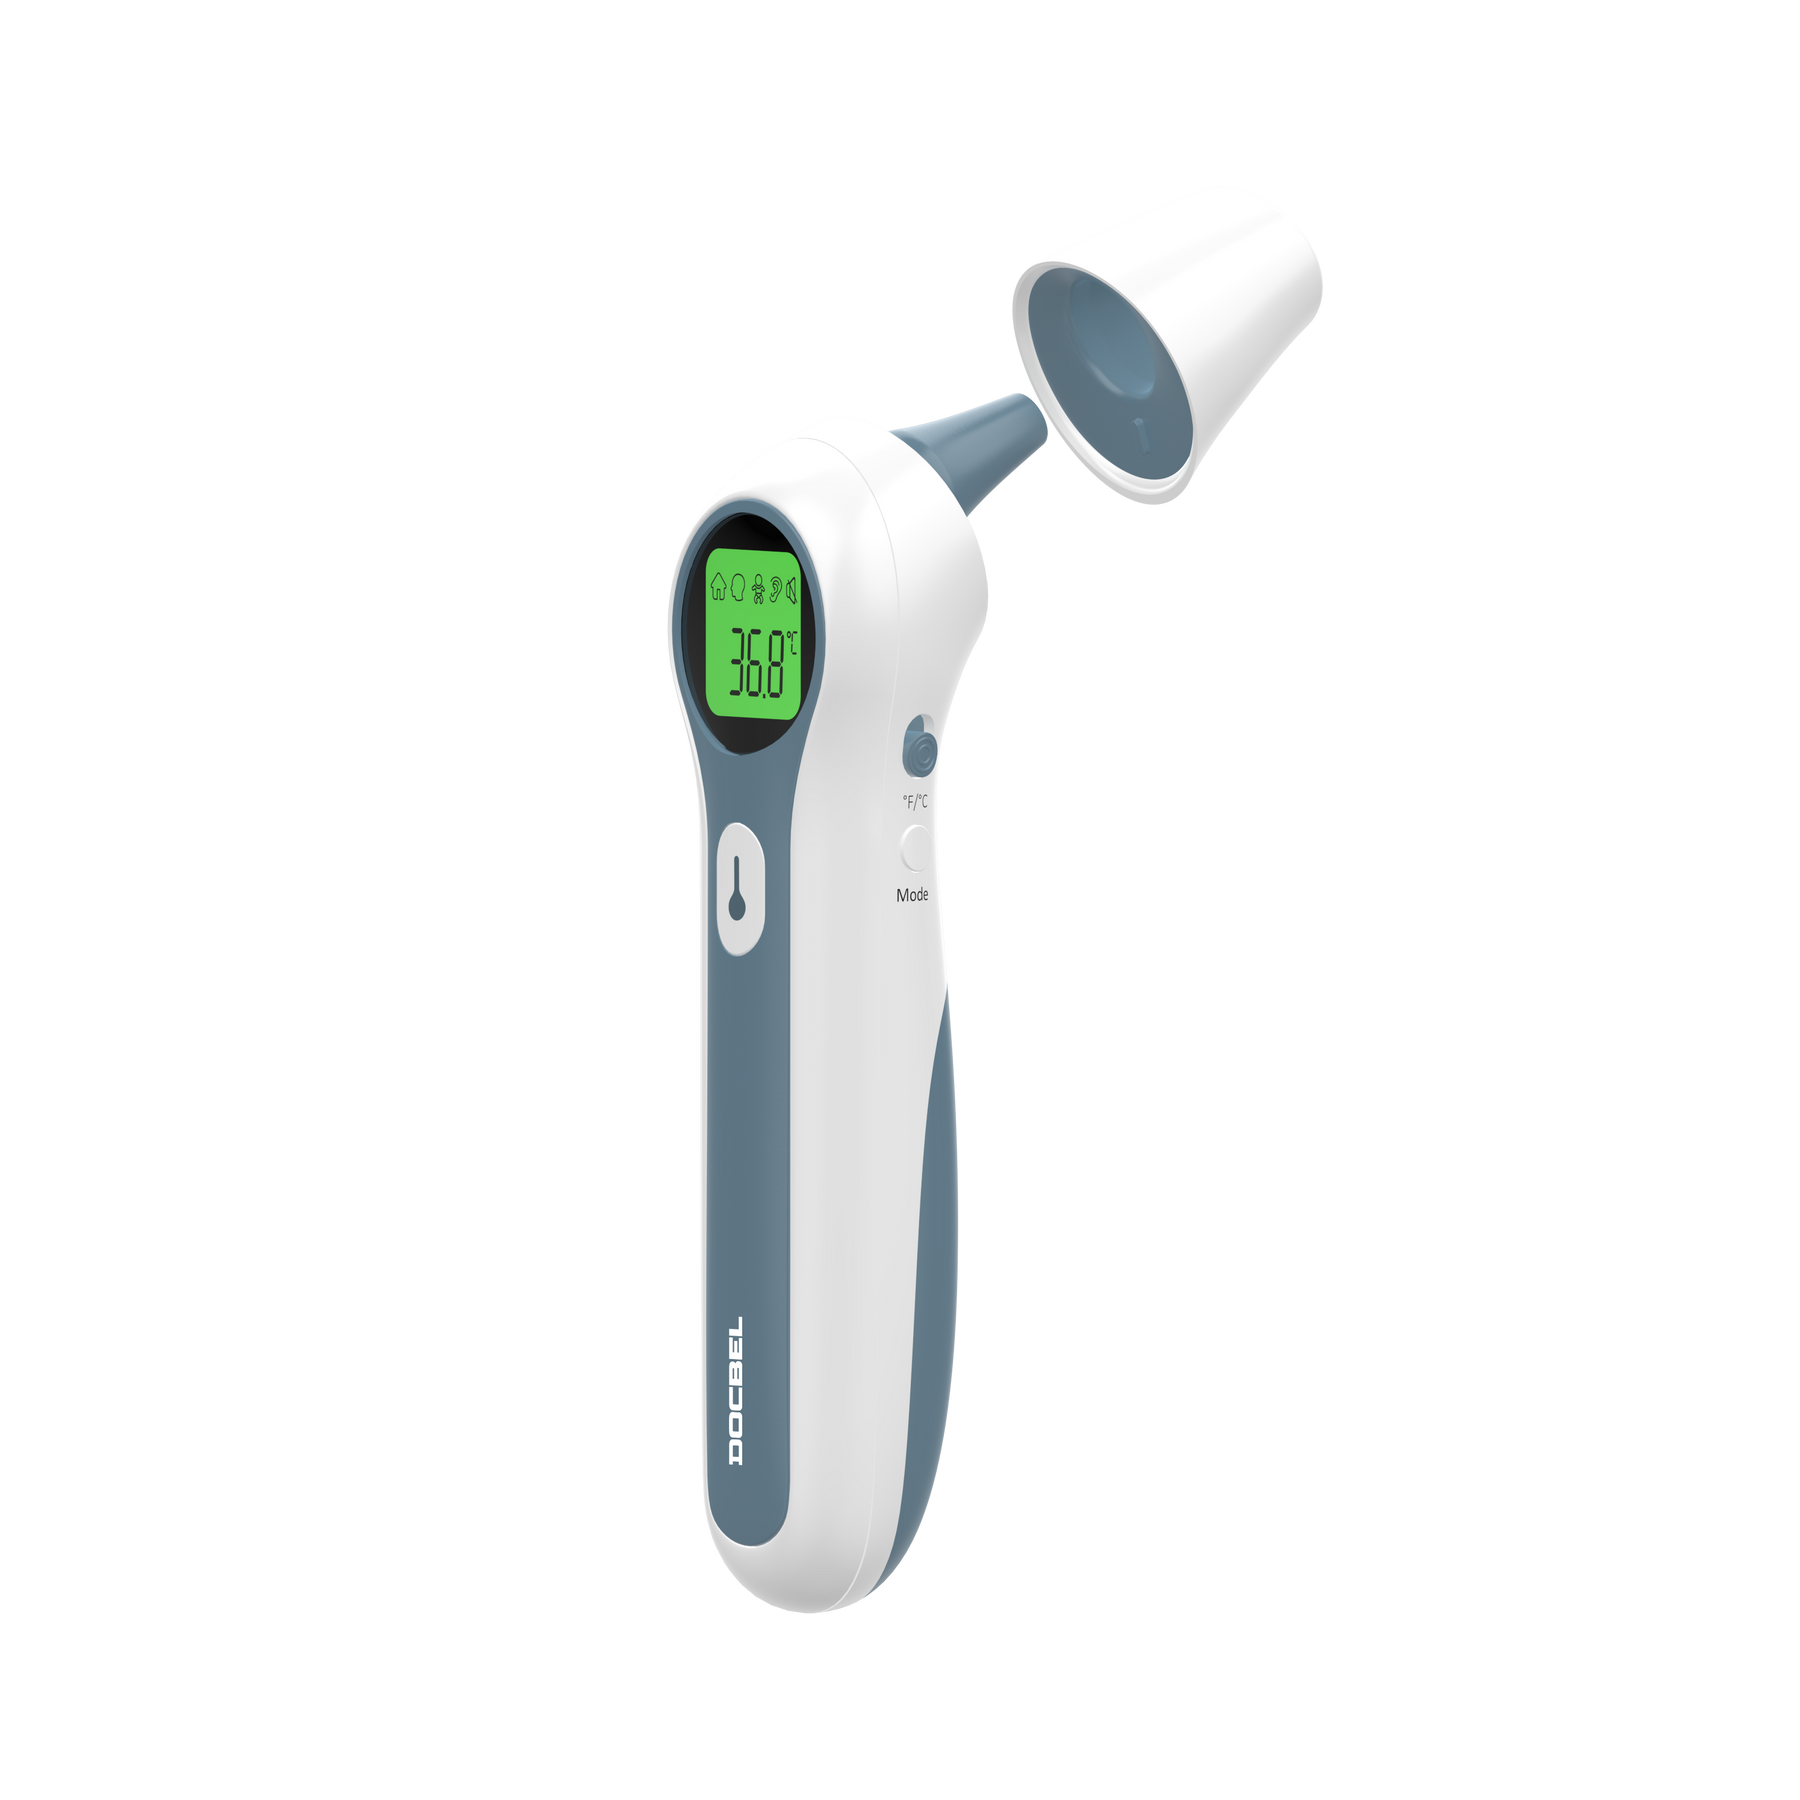 Docbel TH 300 Non Contact Digital Infrared Thermometer